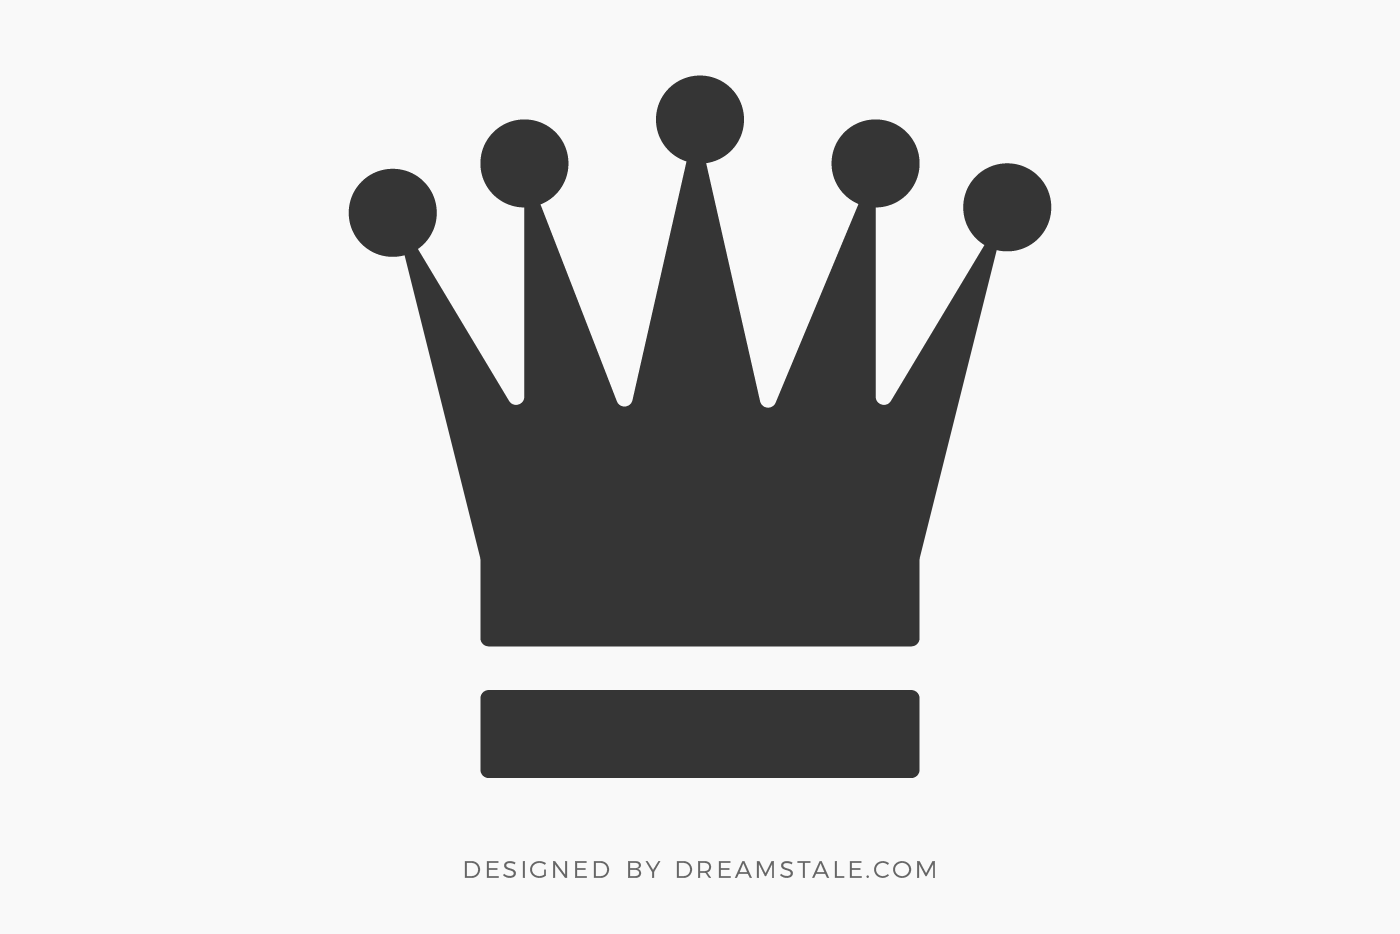 Download King Crown Free SVG Clipart - Dreamstale